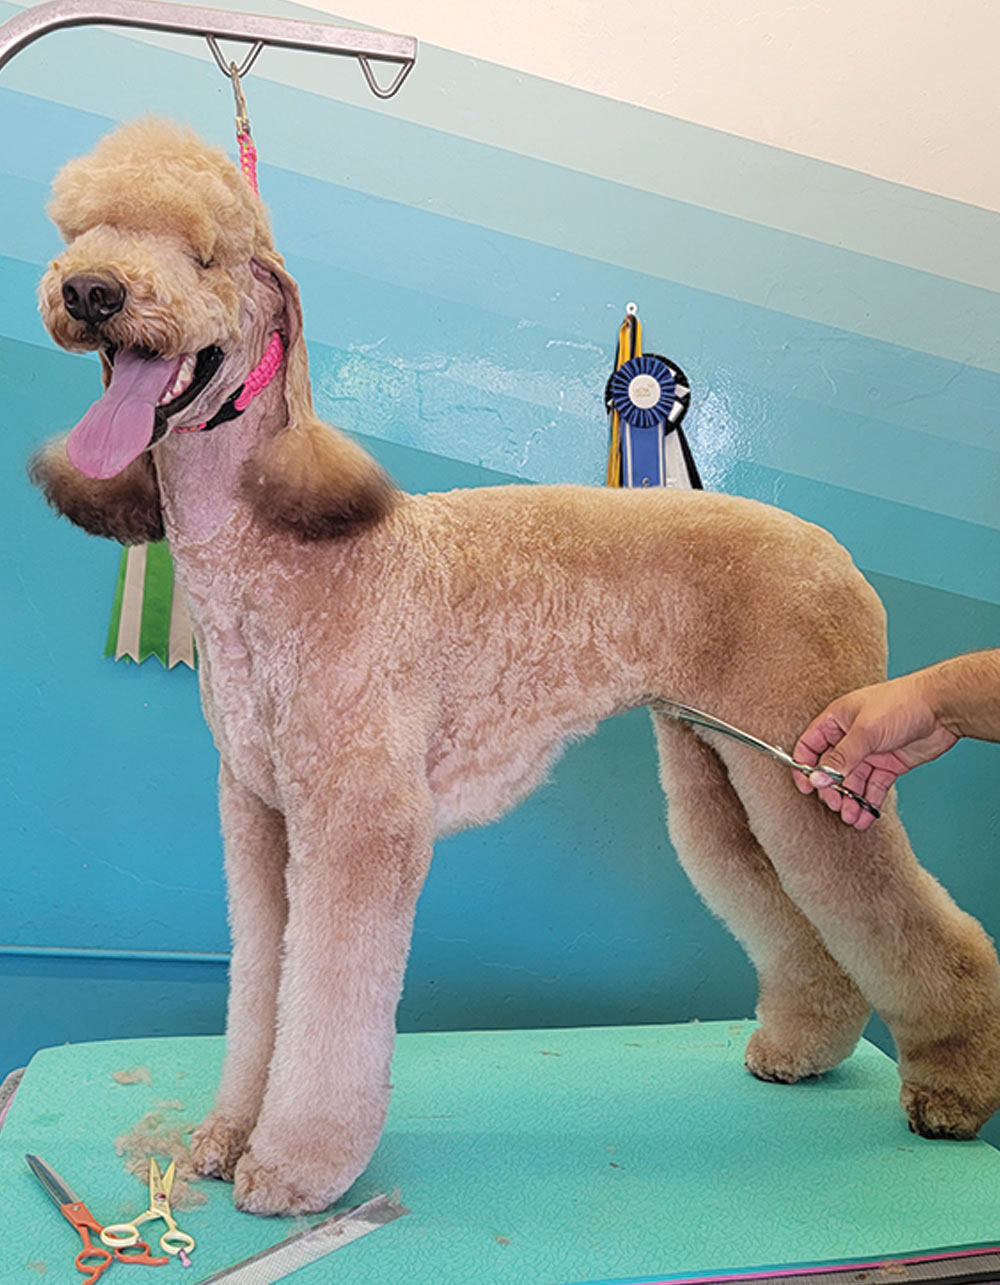 Clipping poodle's tuck-up